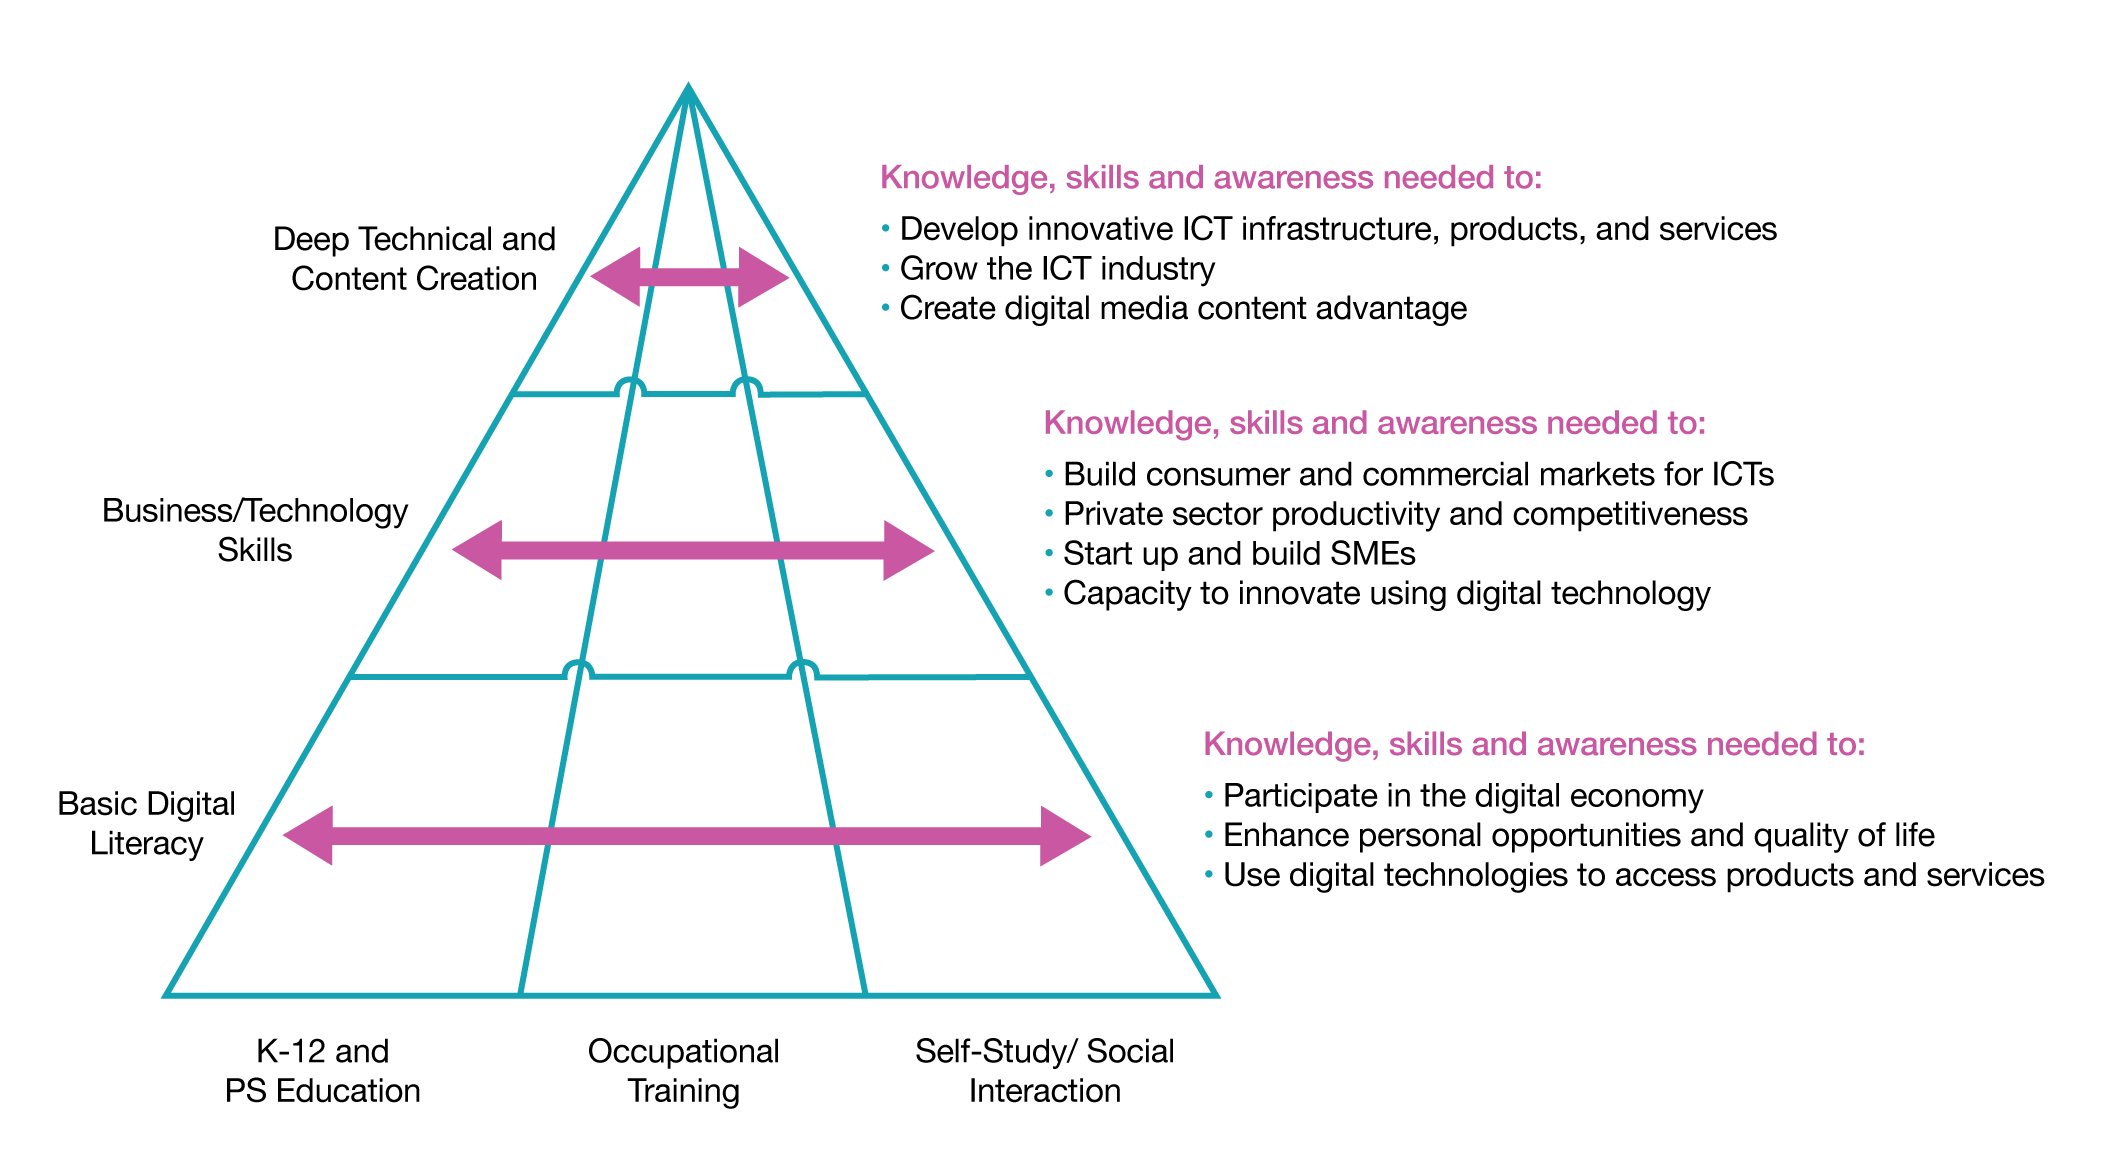 A triangle-shaped diagram depicts three levels of skills related to information and communications technology. At the top are deep technical and content creation skills. In the middle are business and technology skills. At the bottom are basic digital literacy skills. The pyramid makes clear that it is basic digital literacy skills that are most needed. These skills enable people to participate in the digital economy, enhance their quality of life, and access products and services.